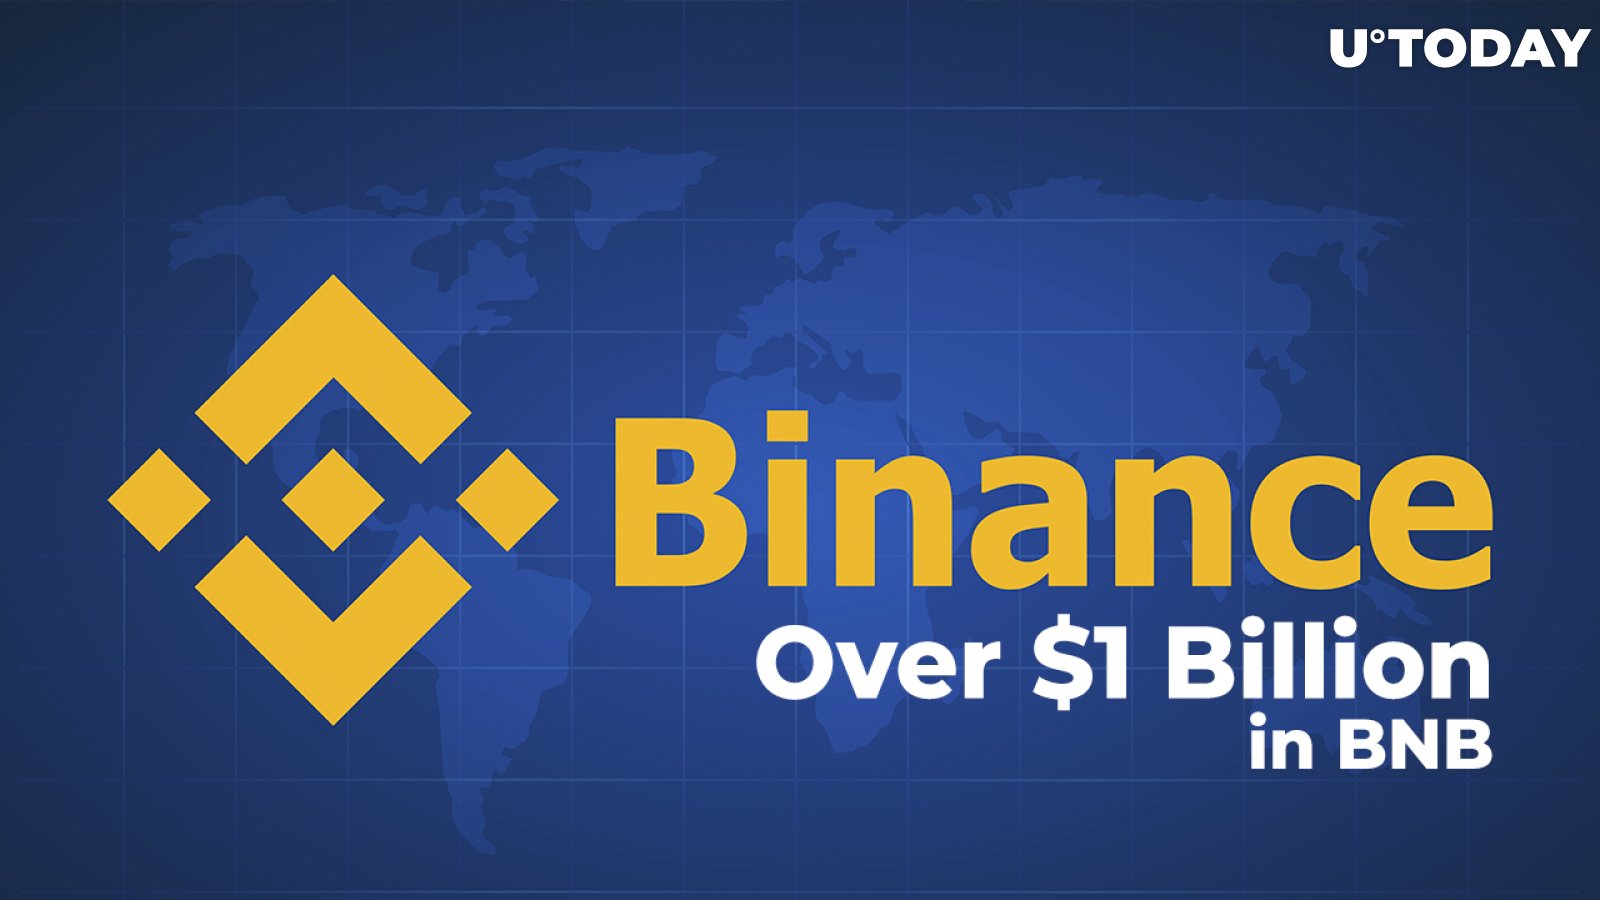 Over $1 Billion in BNB Moved After Binance Launched DAR Trading